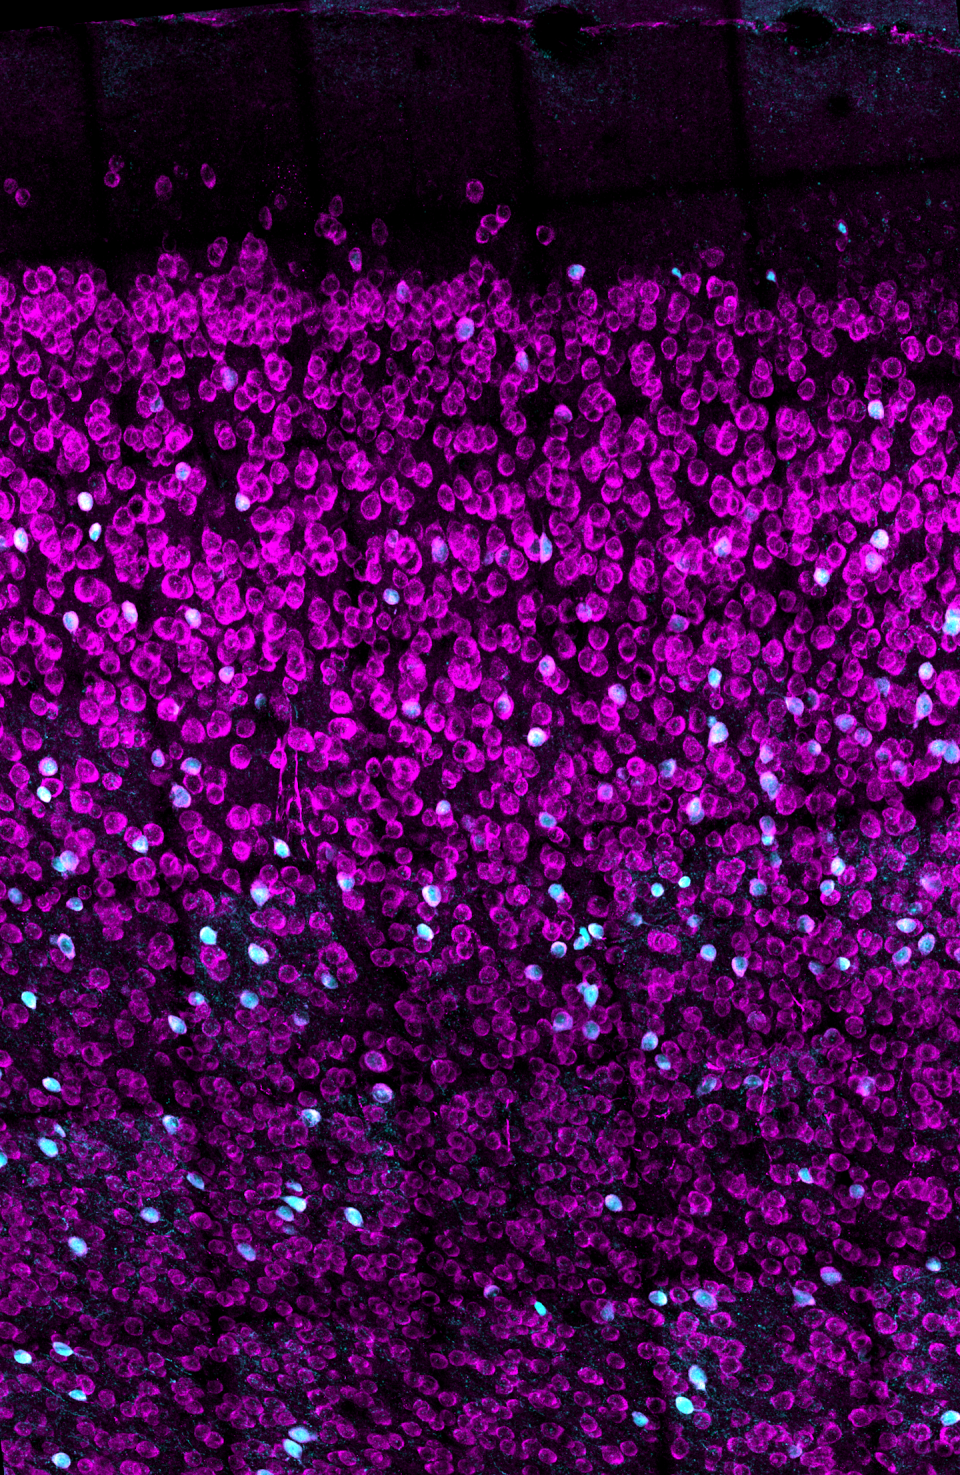 Image of hormone receptors in the prefrontal cortex of the brain, lit up in varying colors.